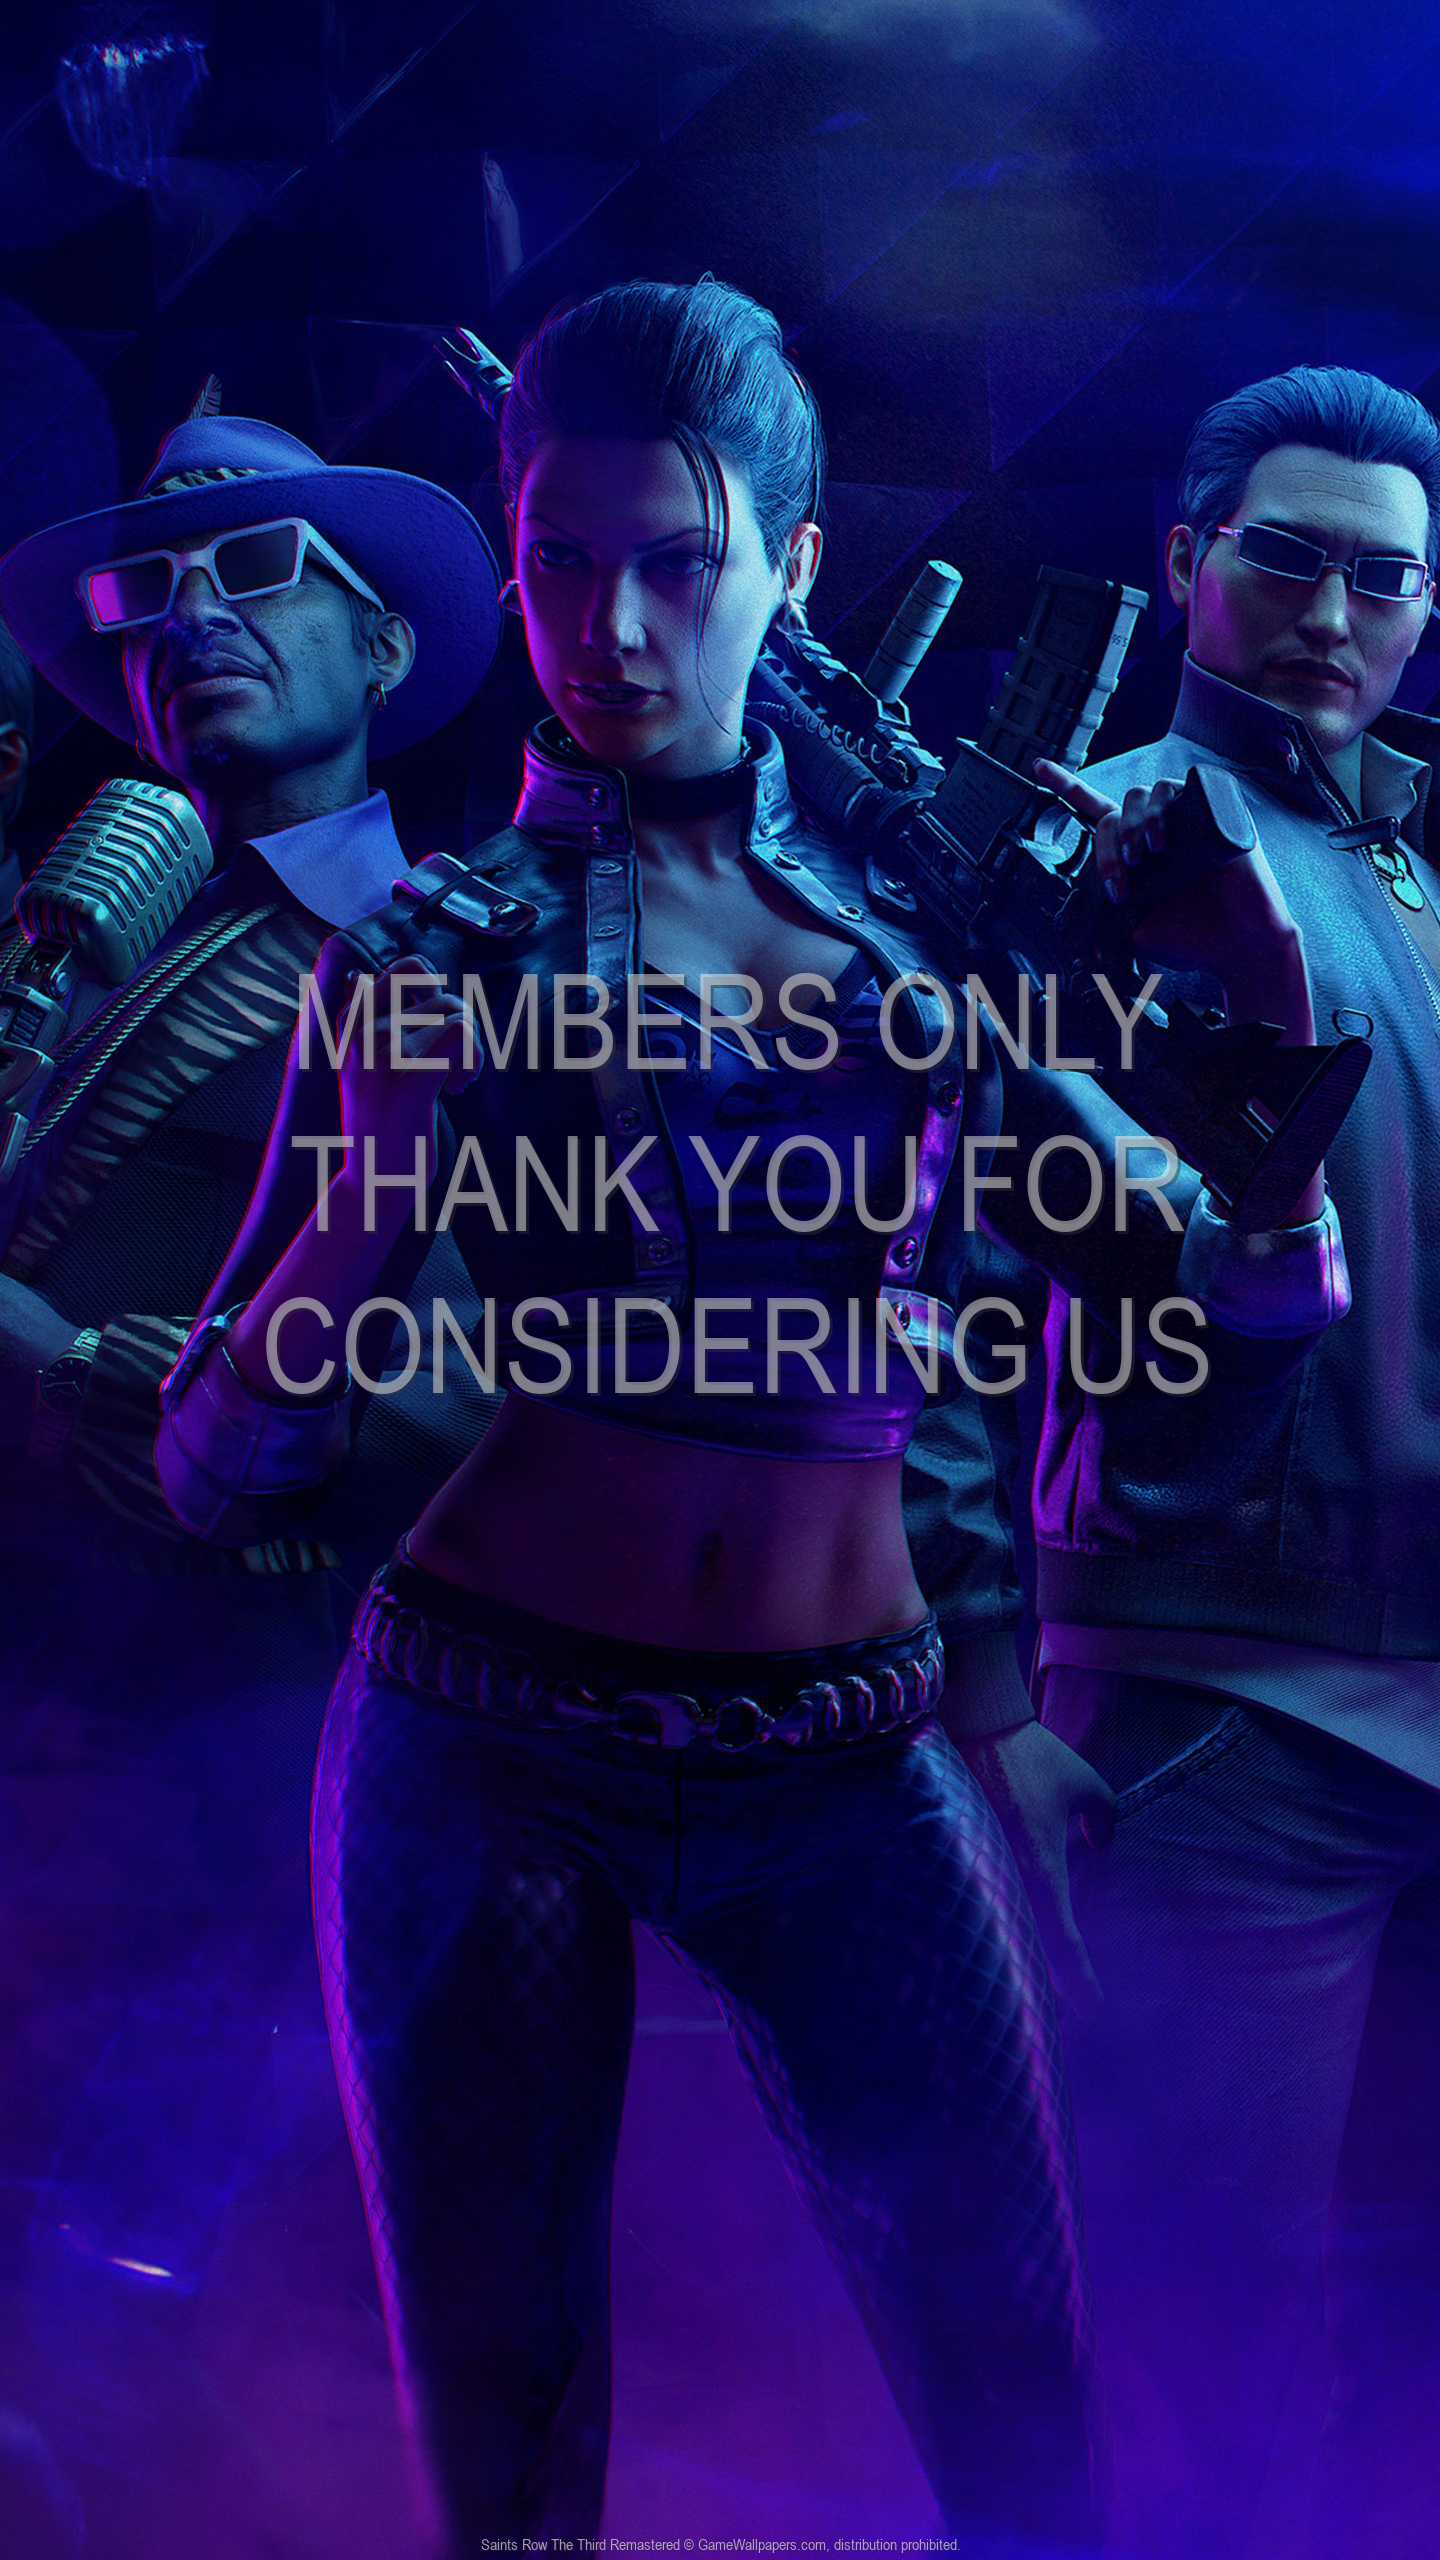 Saints Row: The Third Remastered 1440p Vertical Mobile wallpaper or background 01